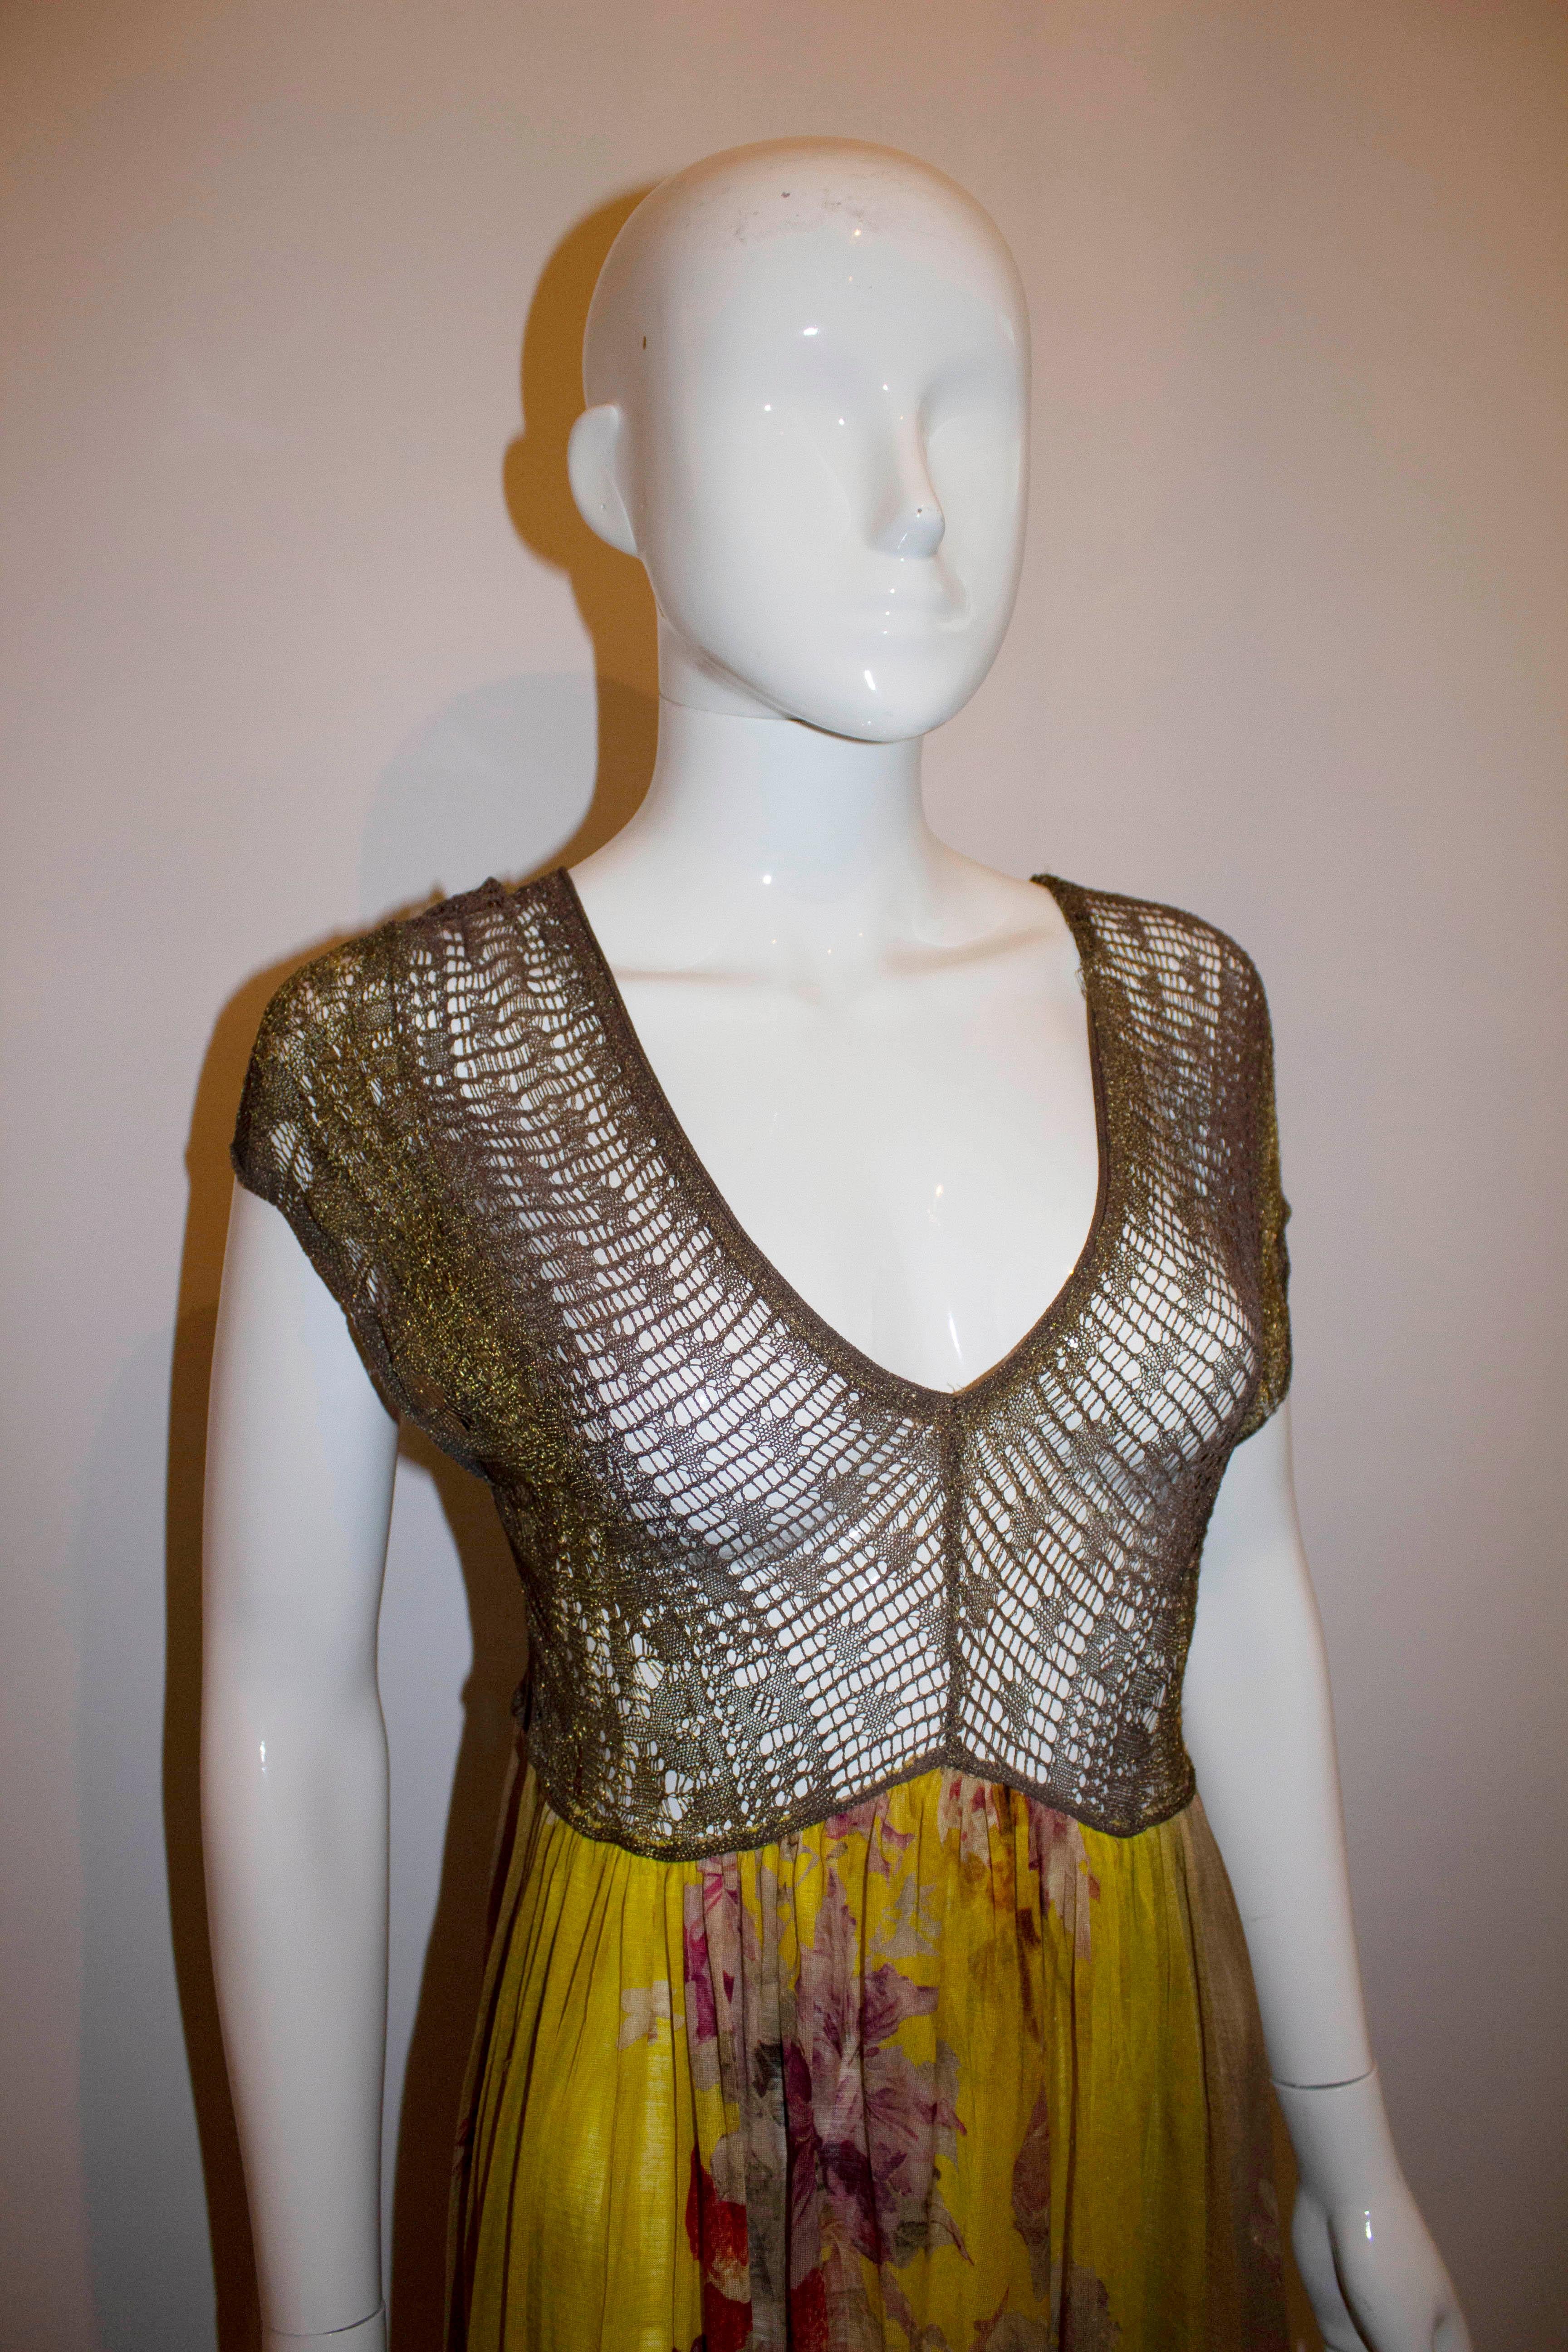 A fabulous vintage dress by Jean Paul Gaultier Maille Femme line. The dress has a gold and brown weave bodice , with a v neckline and back line. The lower part has a yellow background with grape and flower print. 
Size S Bust 36'', length 47''